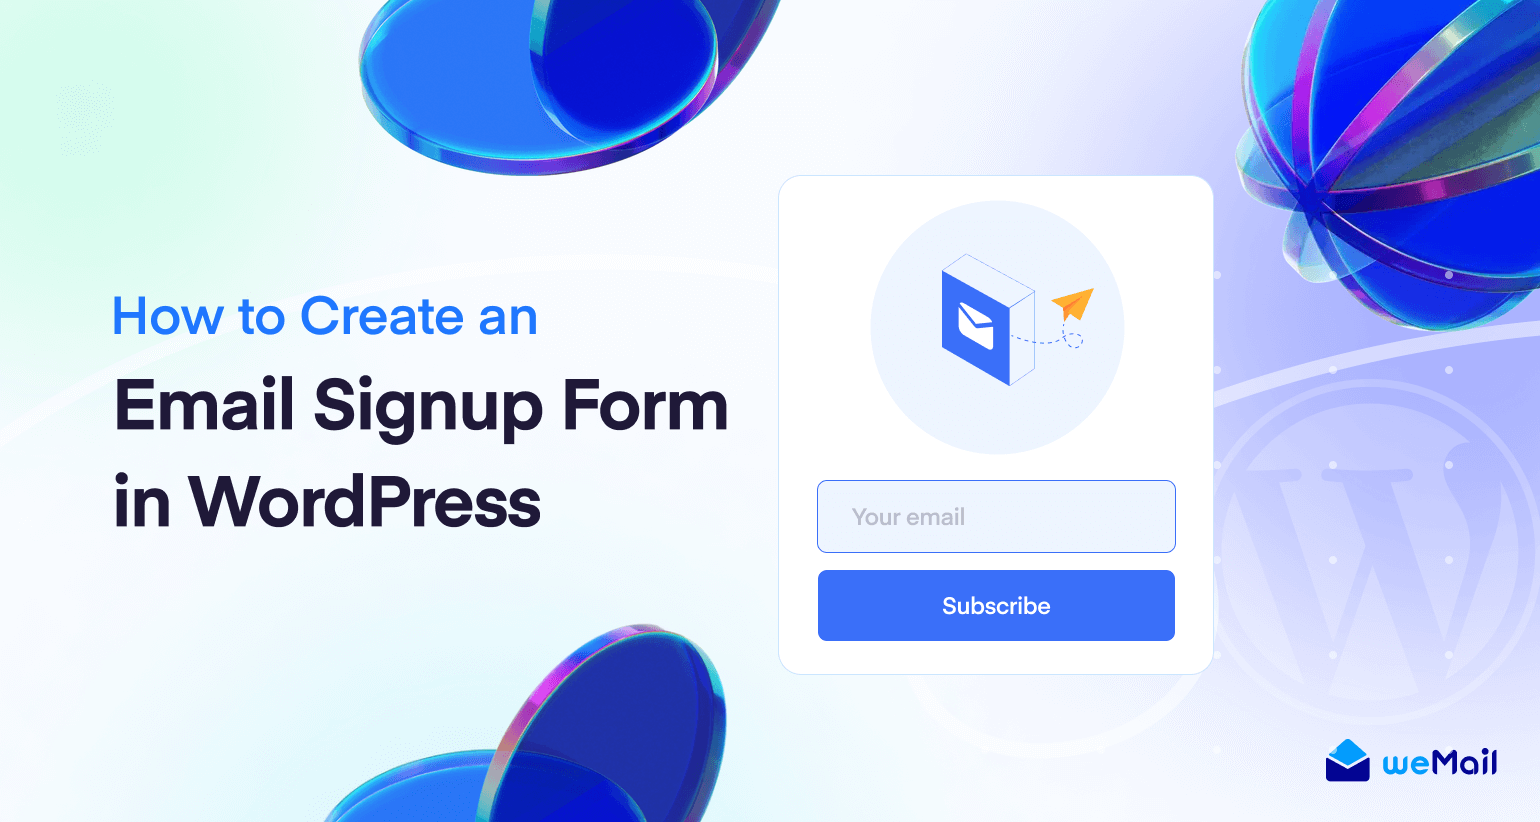 How to Create an Email Signup Form in WordPress